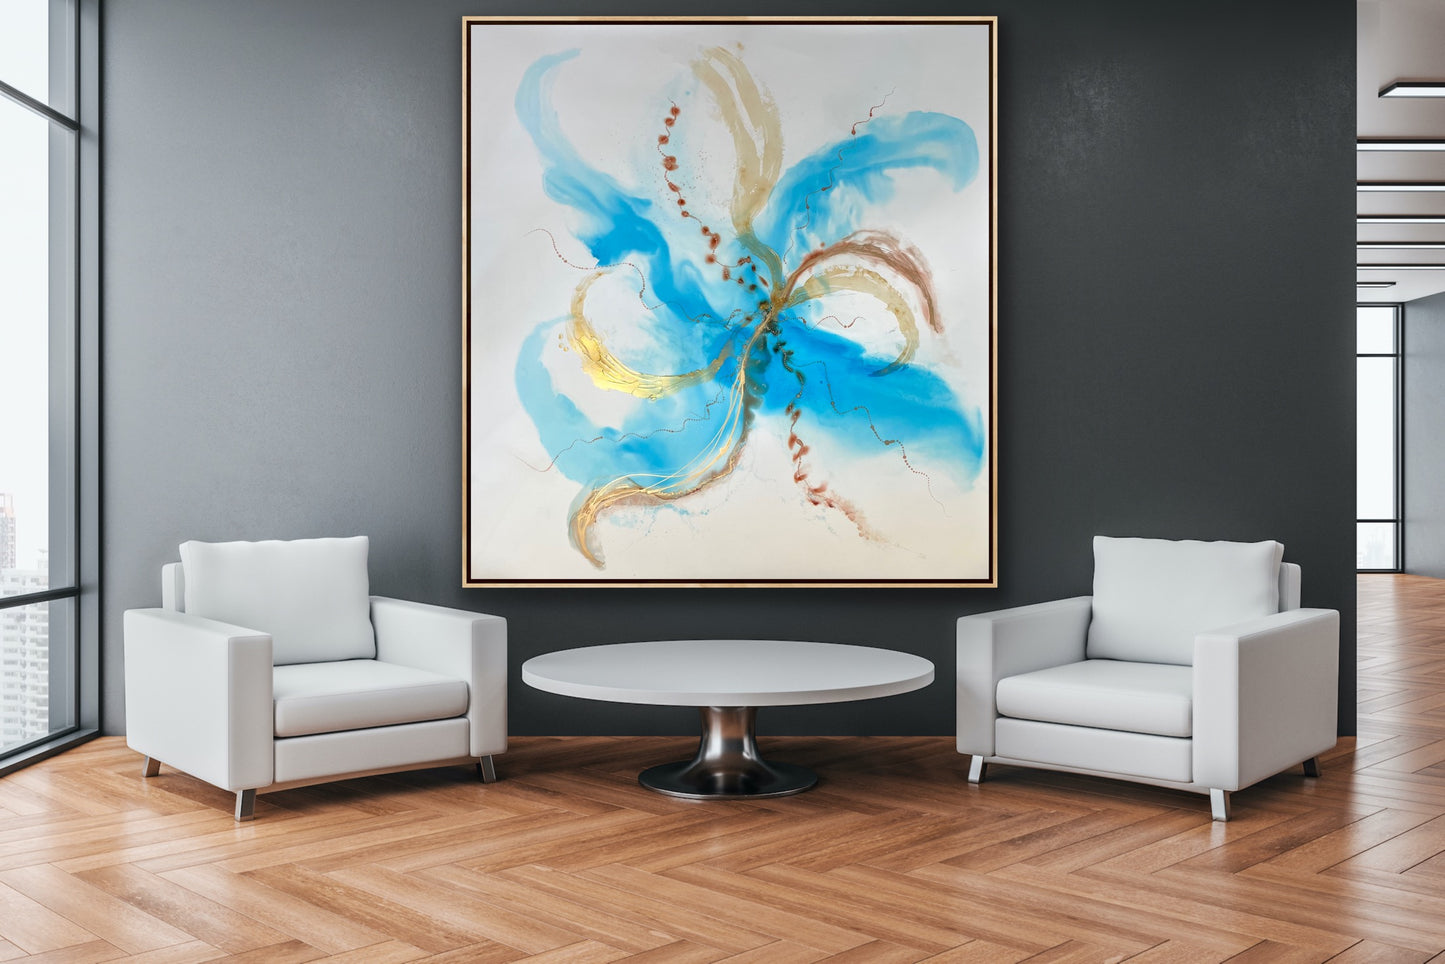 Neptune’s Necklace. Large original abstract painting. Ocean inspired art.